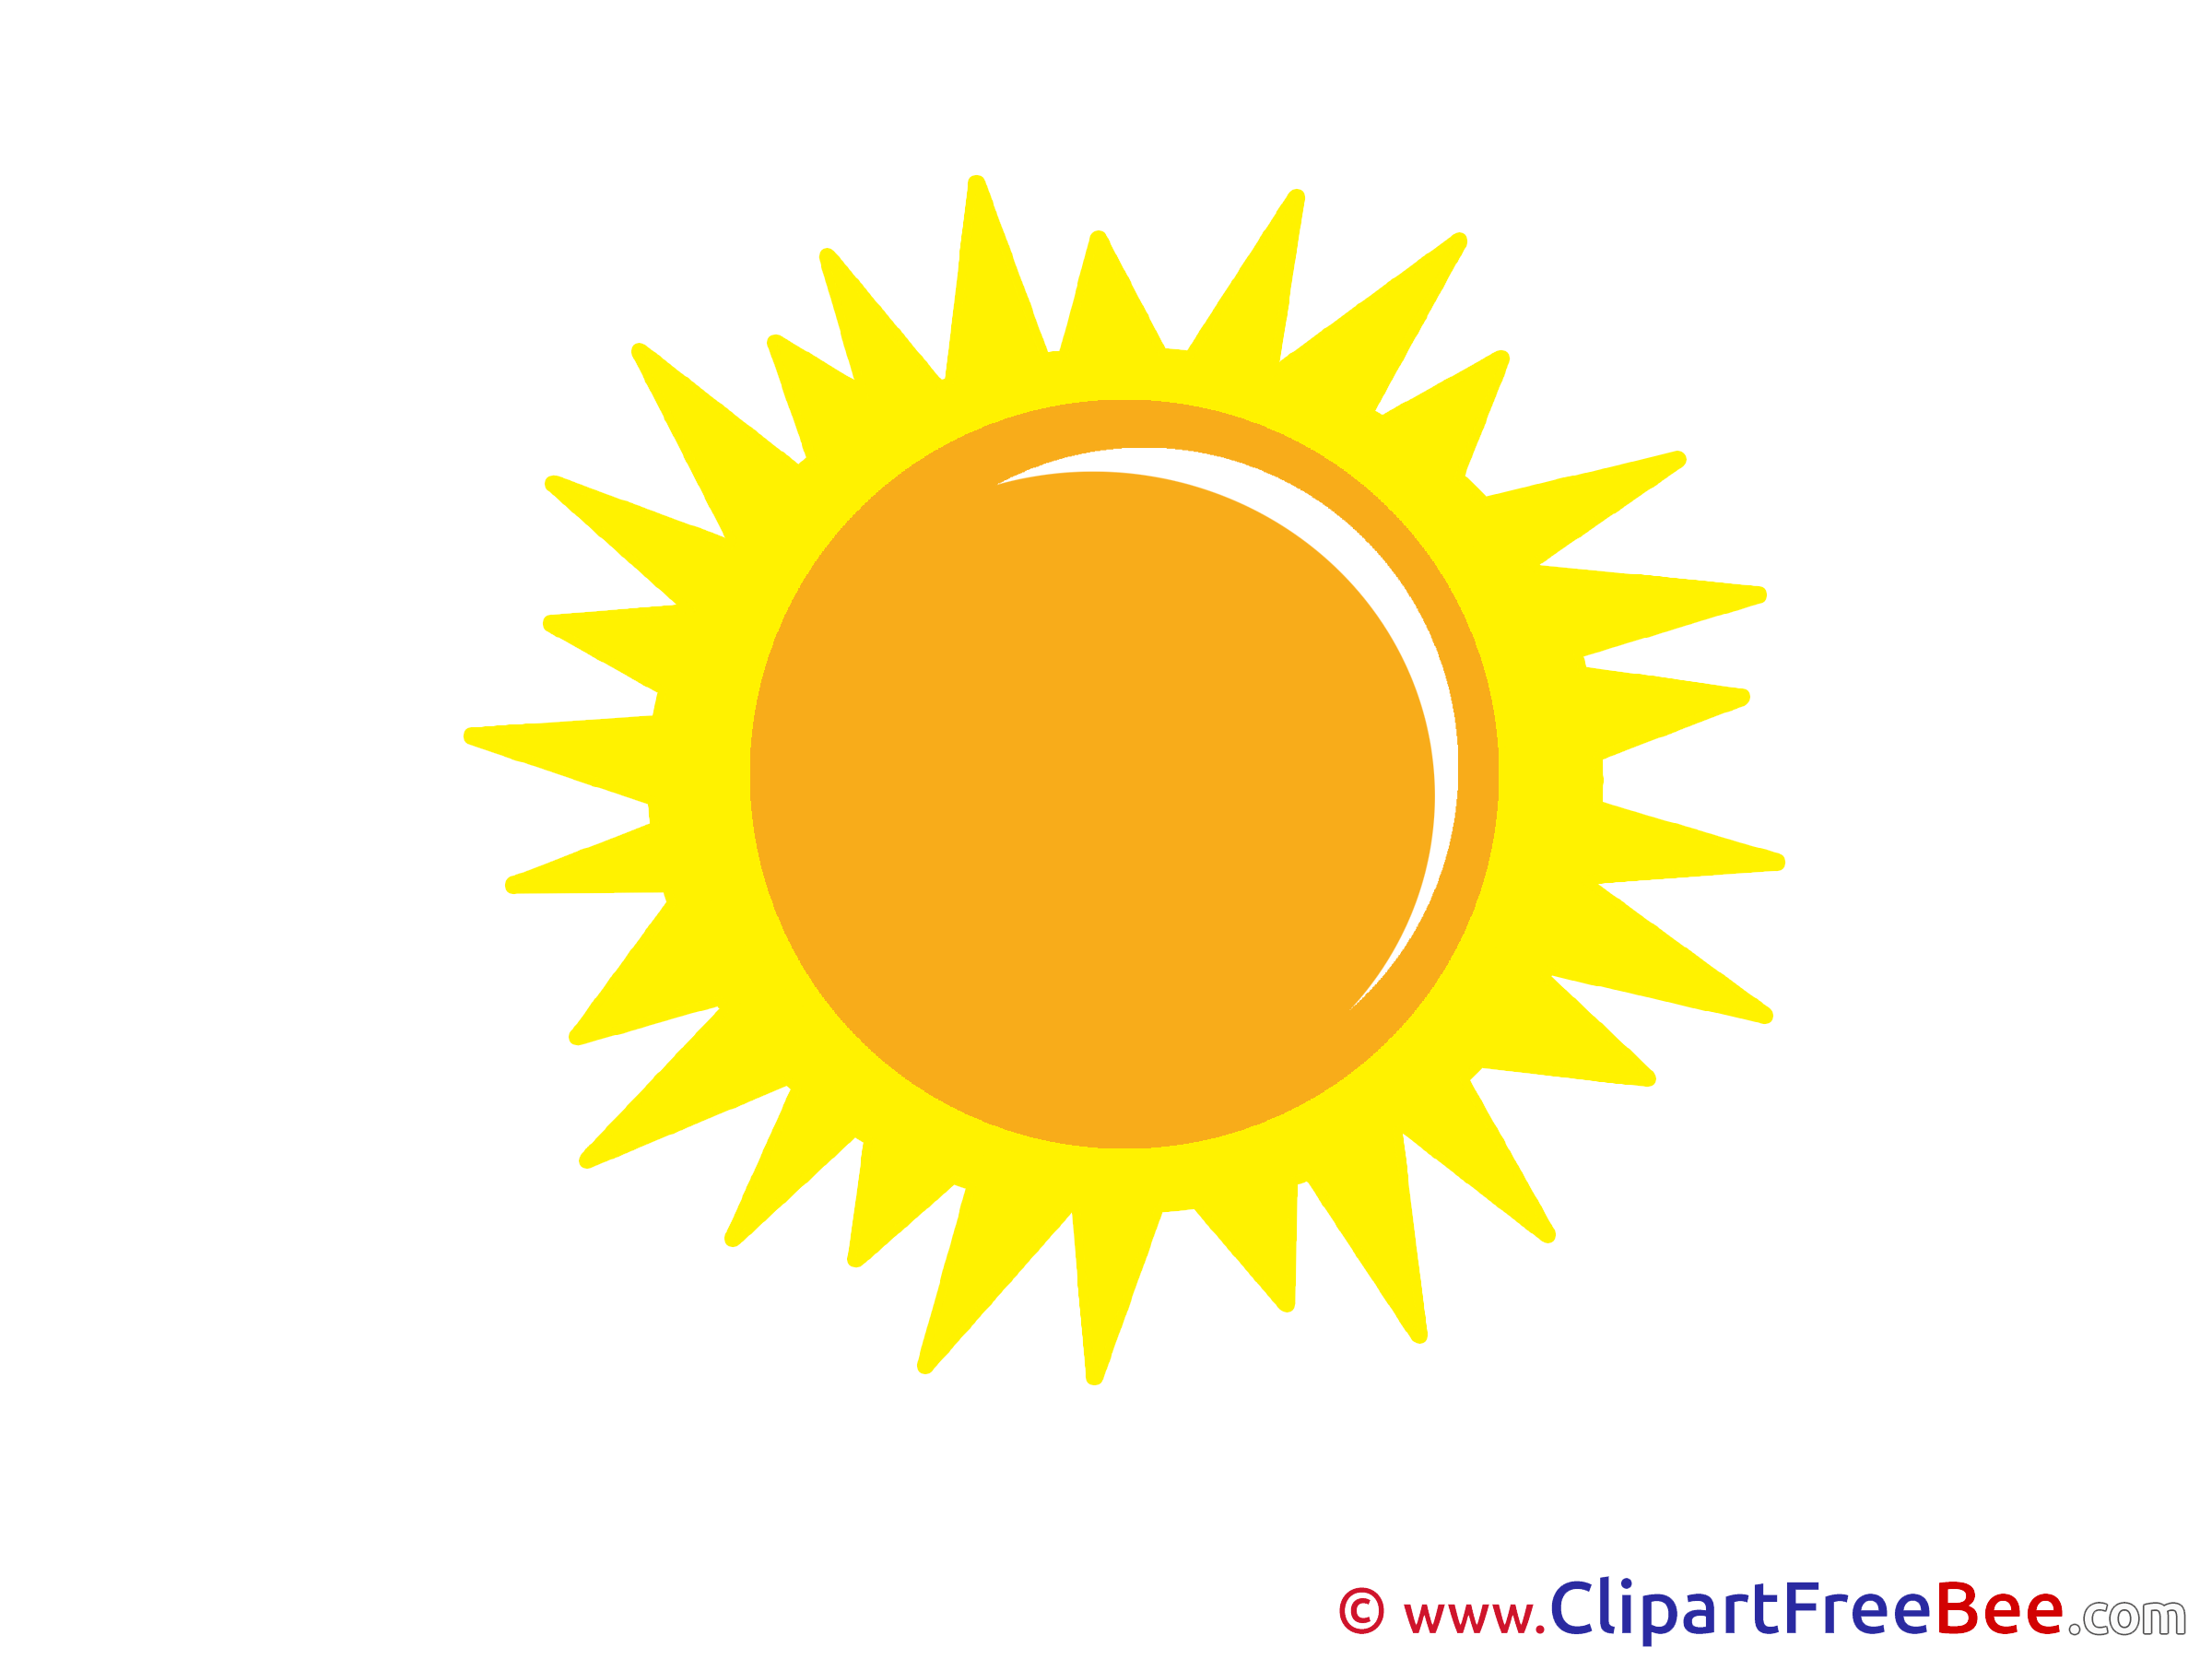 Sun Clipart free Image download